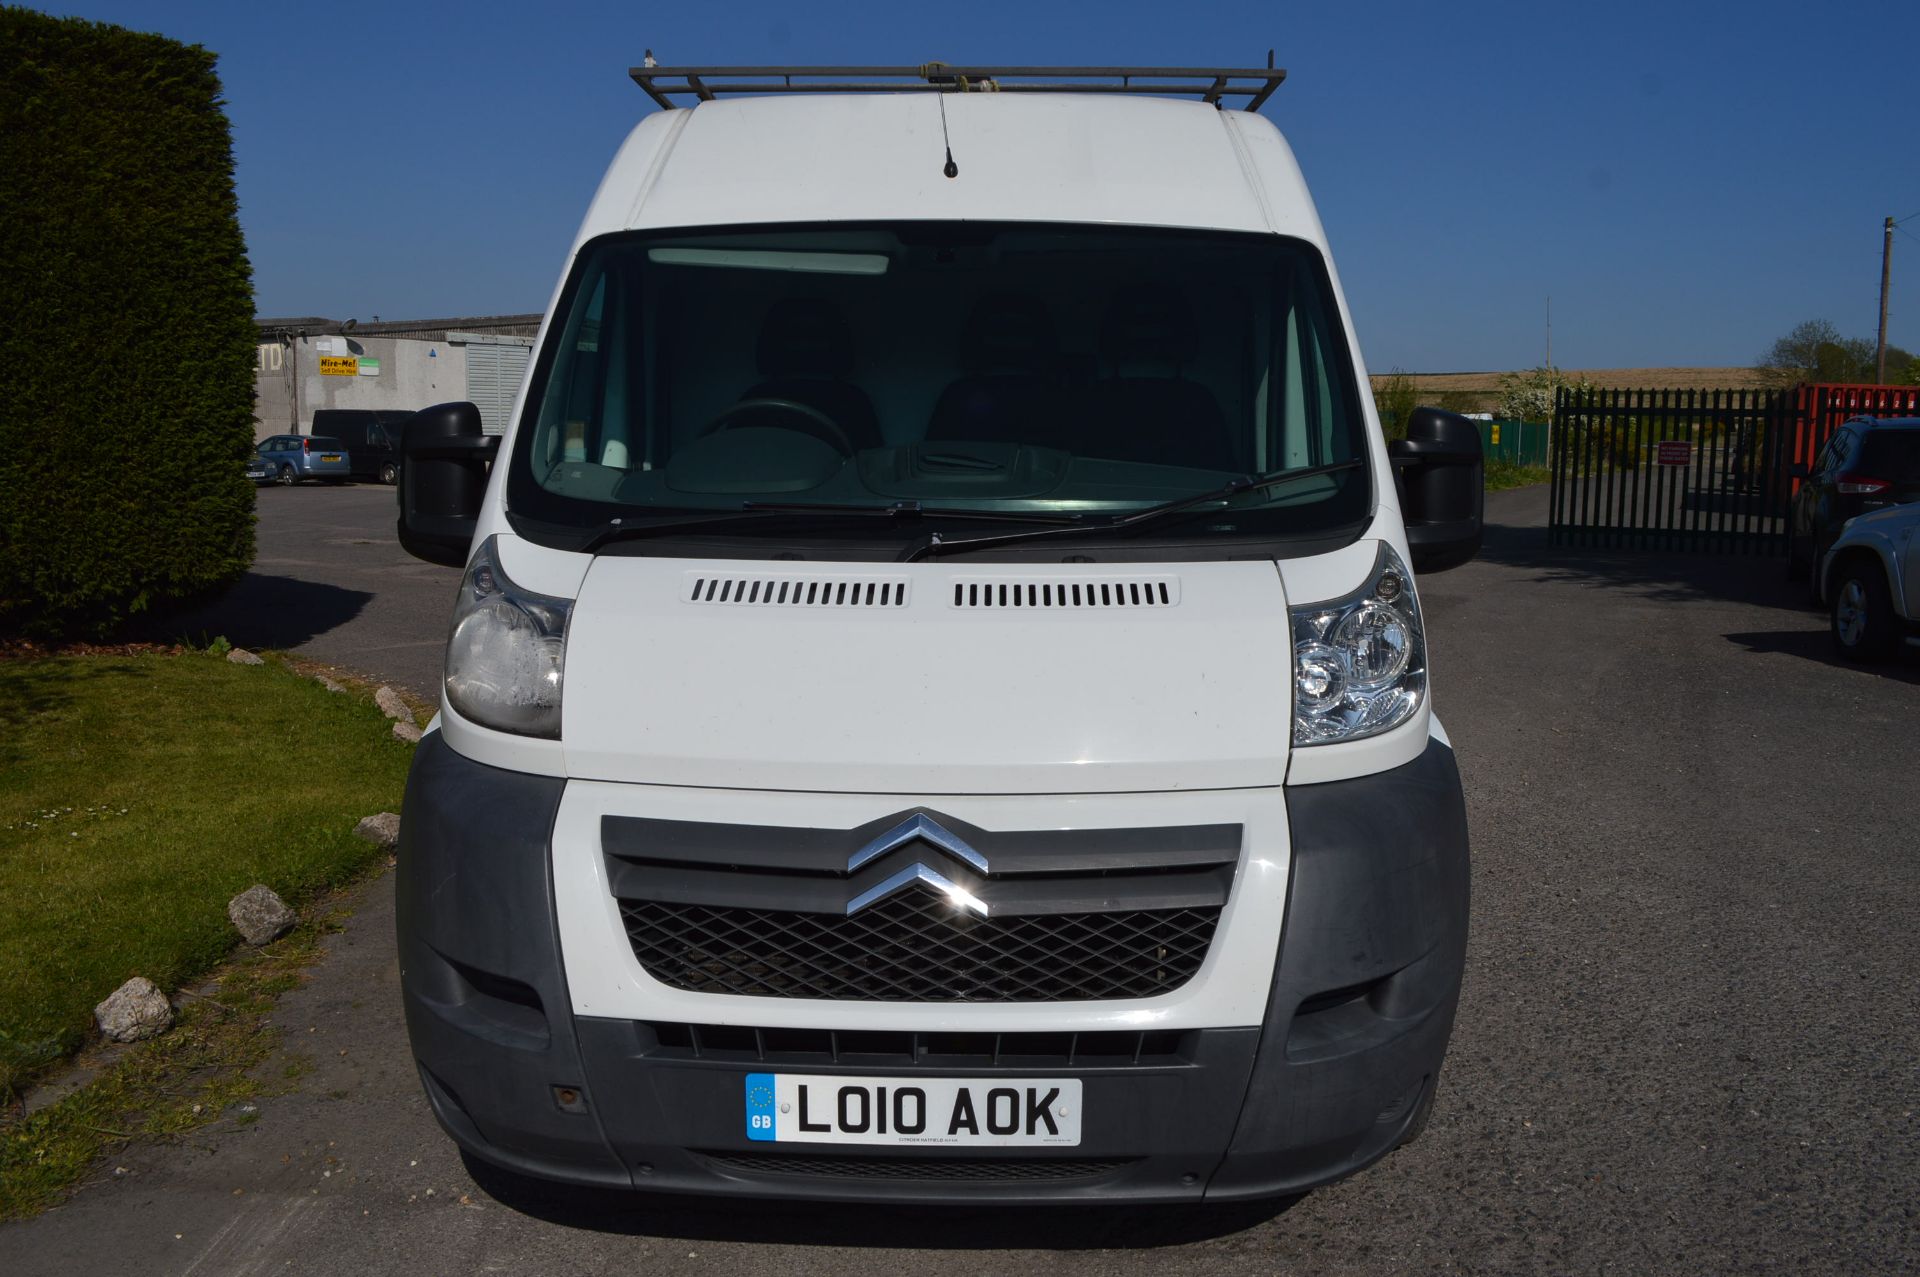 B - 2010/10 REG CITROEN RELAY 35 HDI 120 LWB, 2 FORMER KEEPERS   DATE OF REGISTRATION: 25TH AUGUST - Image 2 of 18